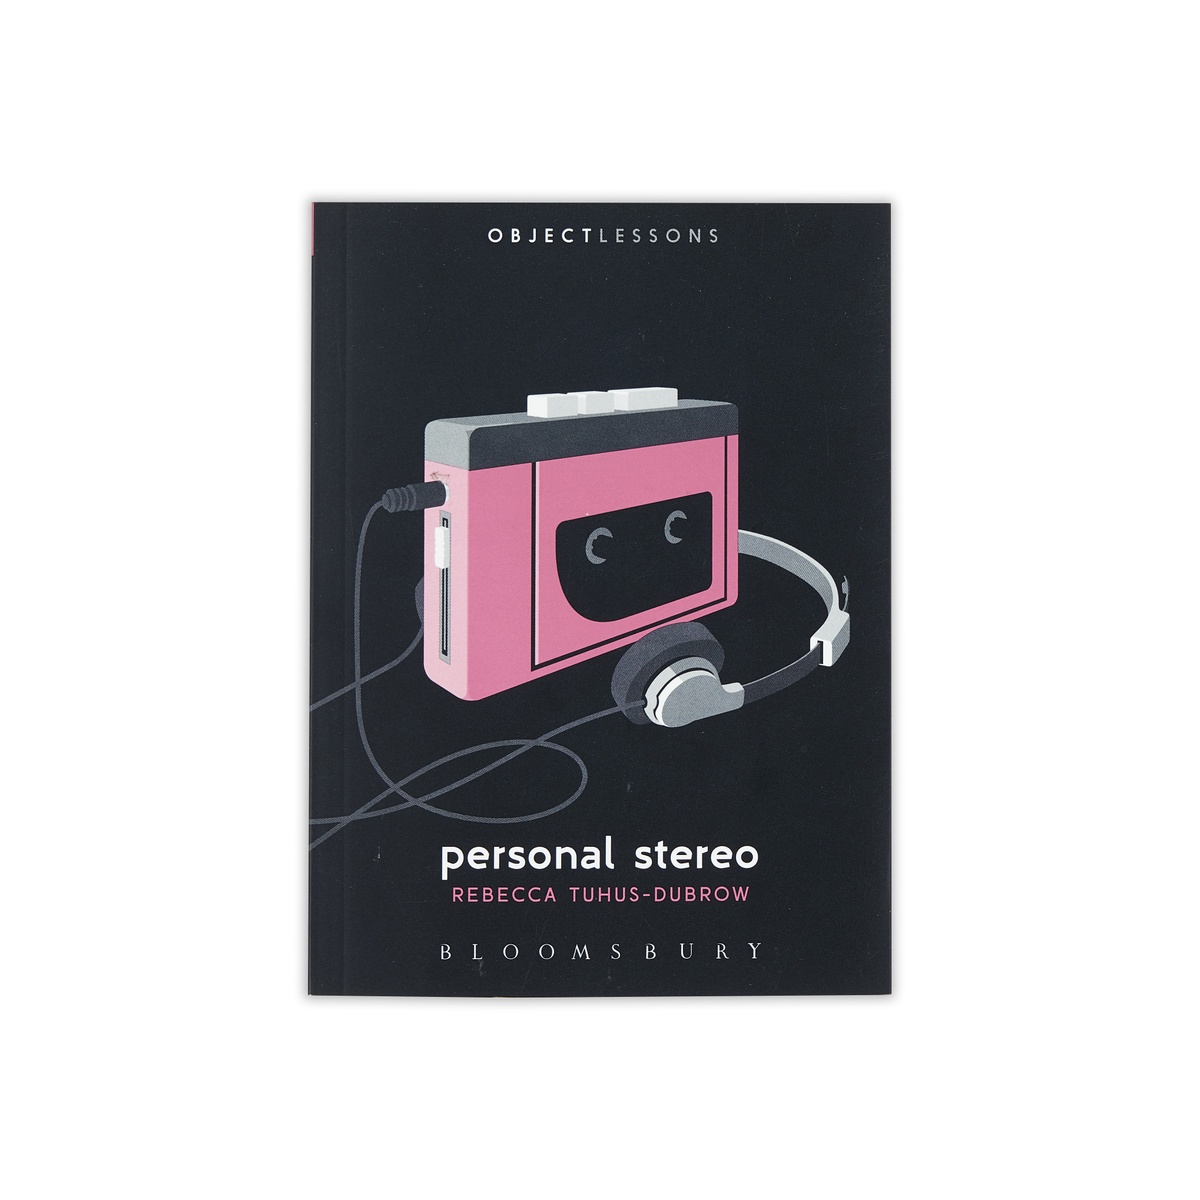 Photograph of the cover of Rebecca Tuhus-Dubrow's book 'Personal Stereo' from Bloomsbury's Object Lessons series.
